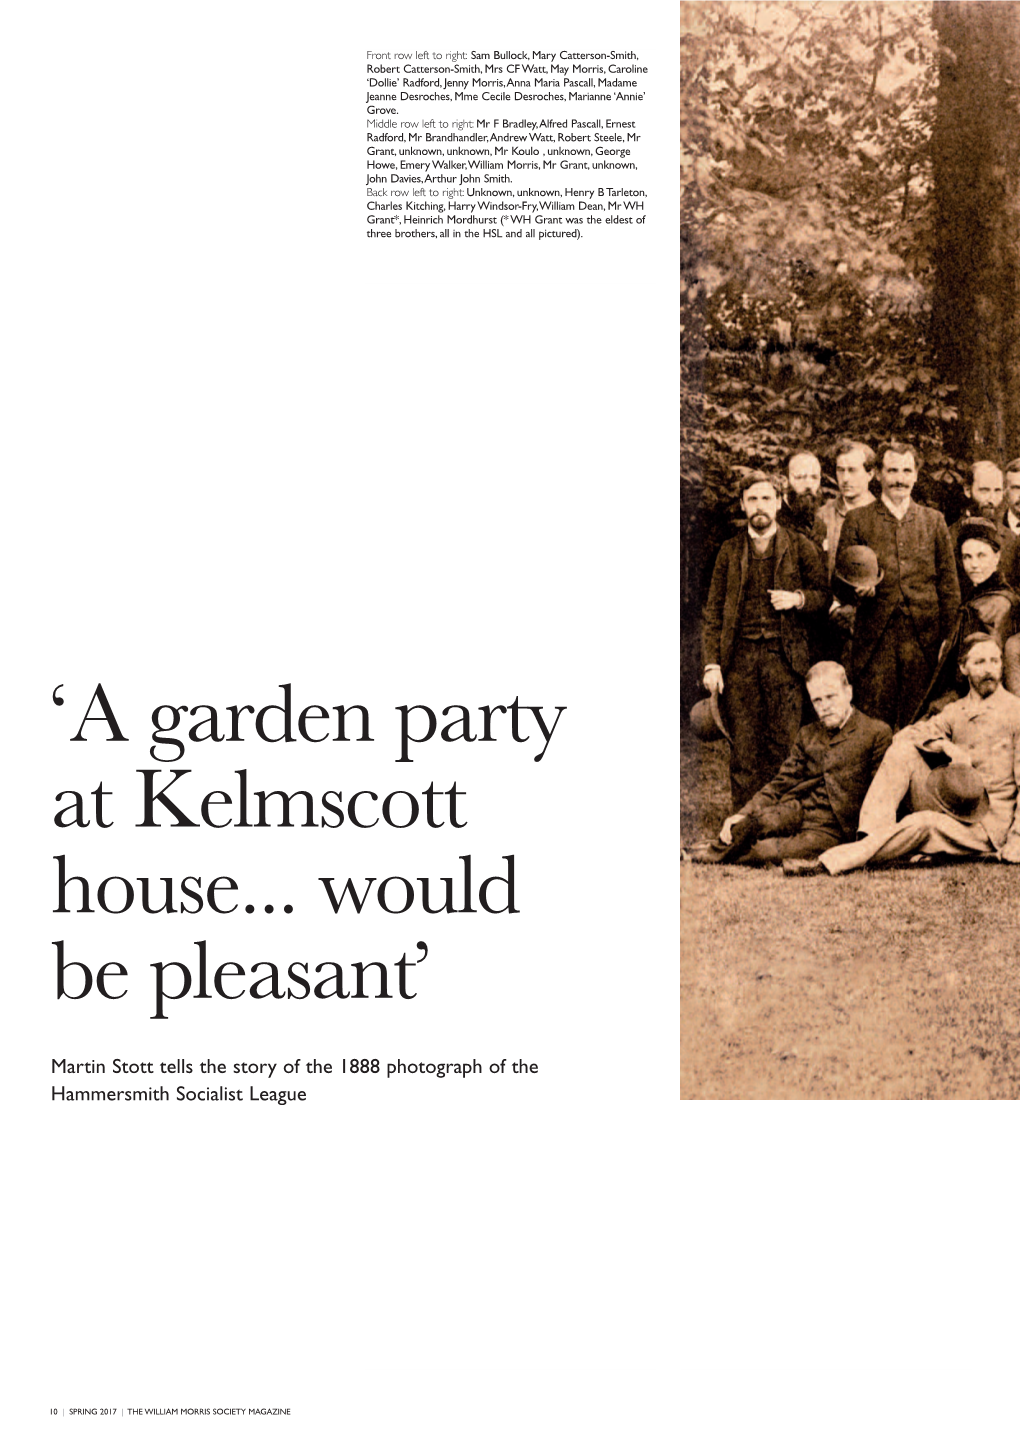 'A Garden Party at Kelmscott House... Would Be Pleasant'